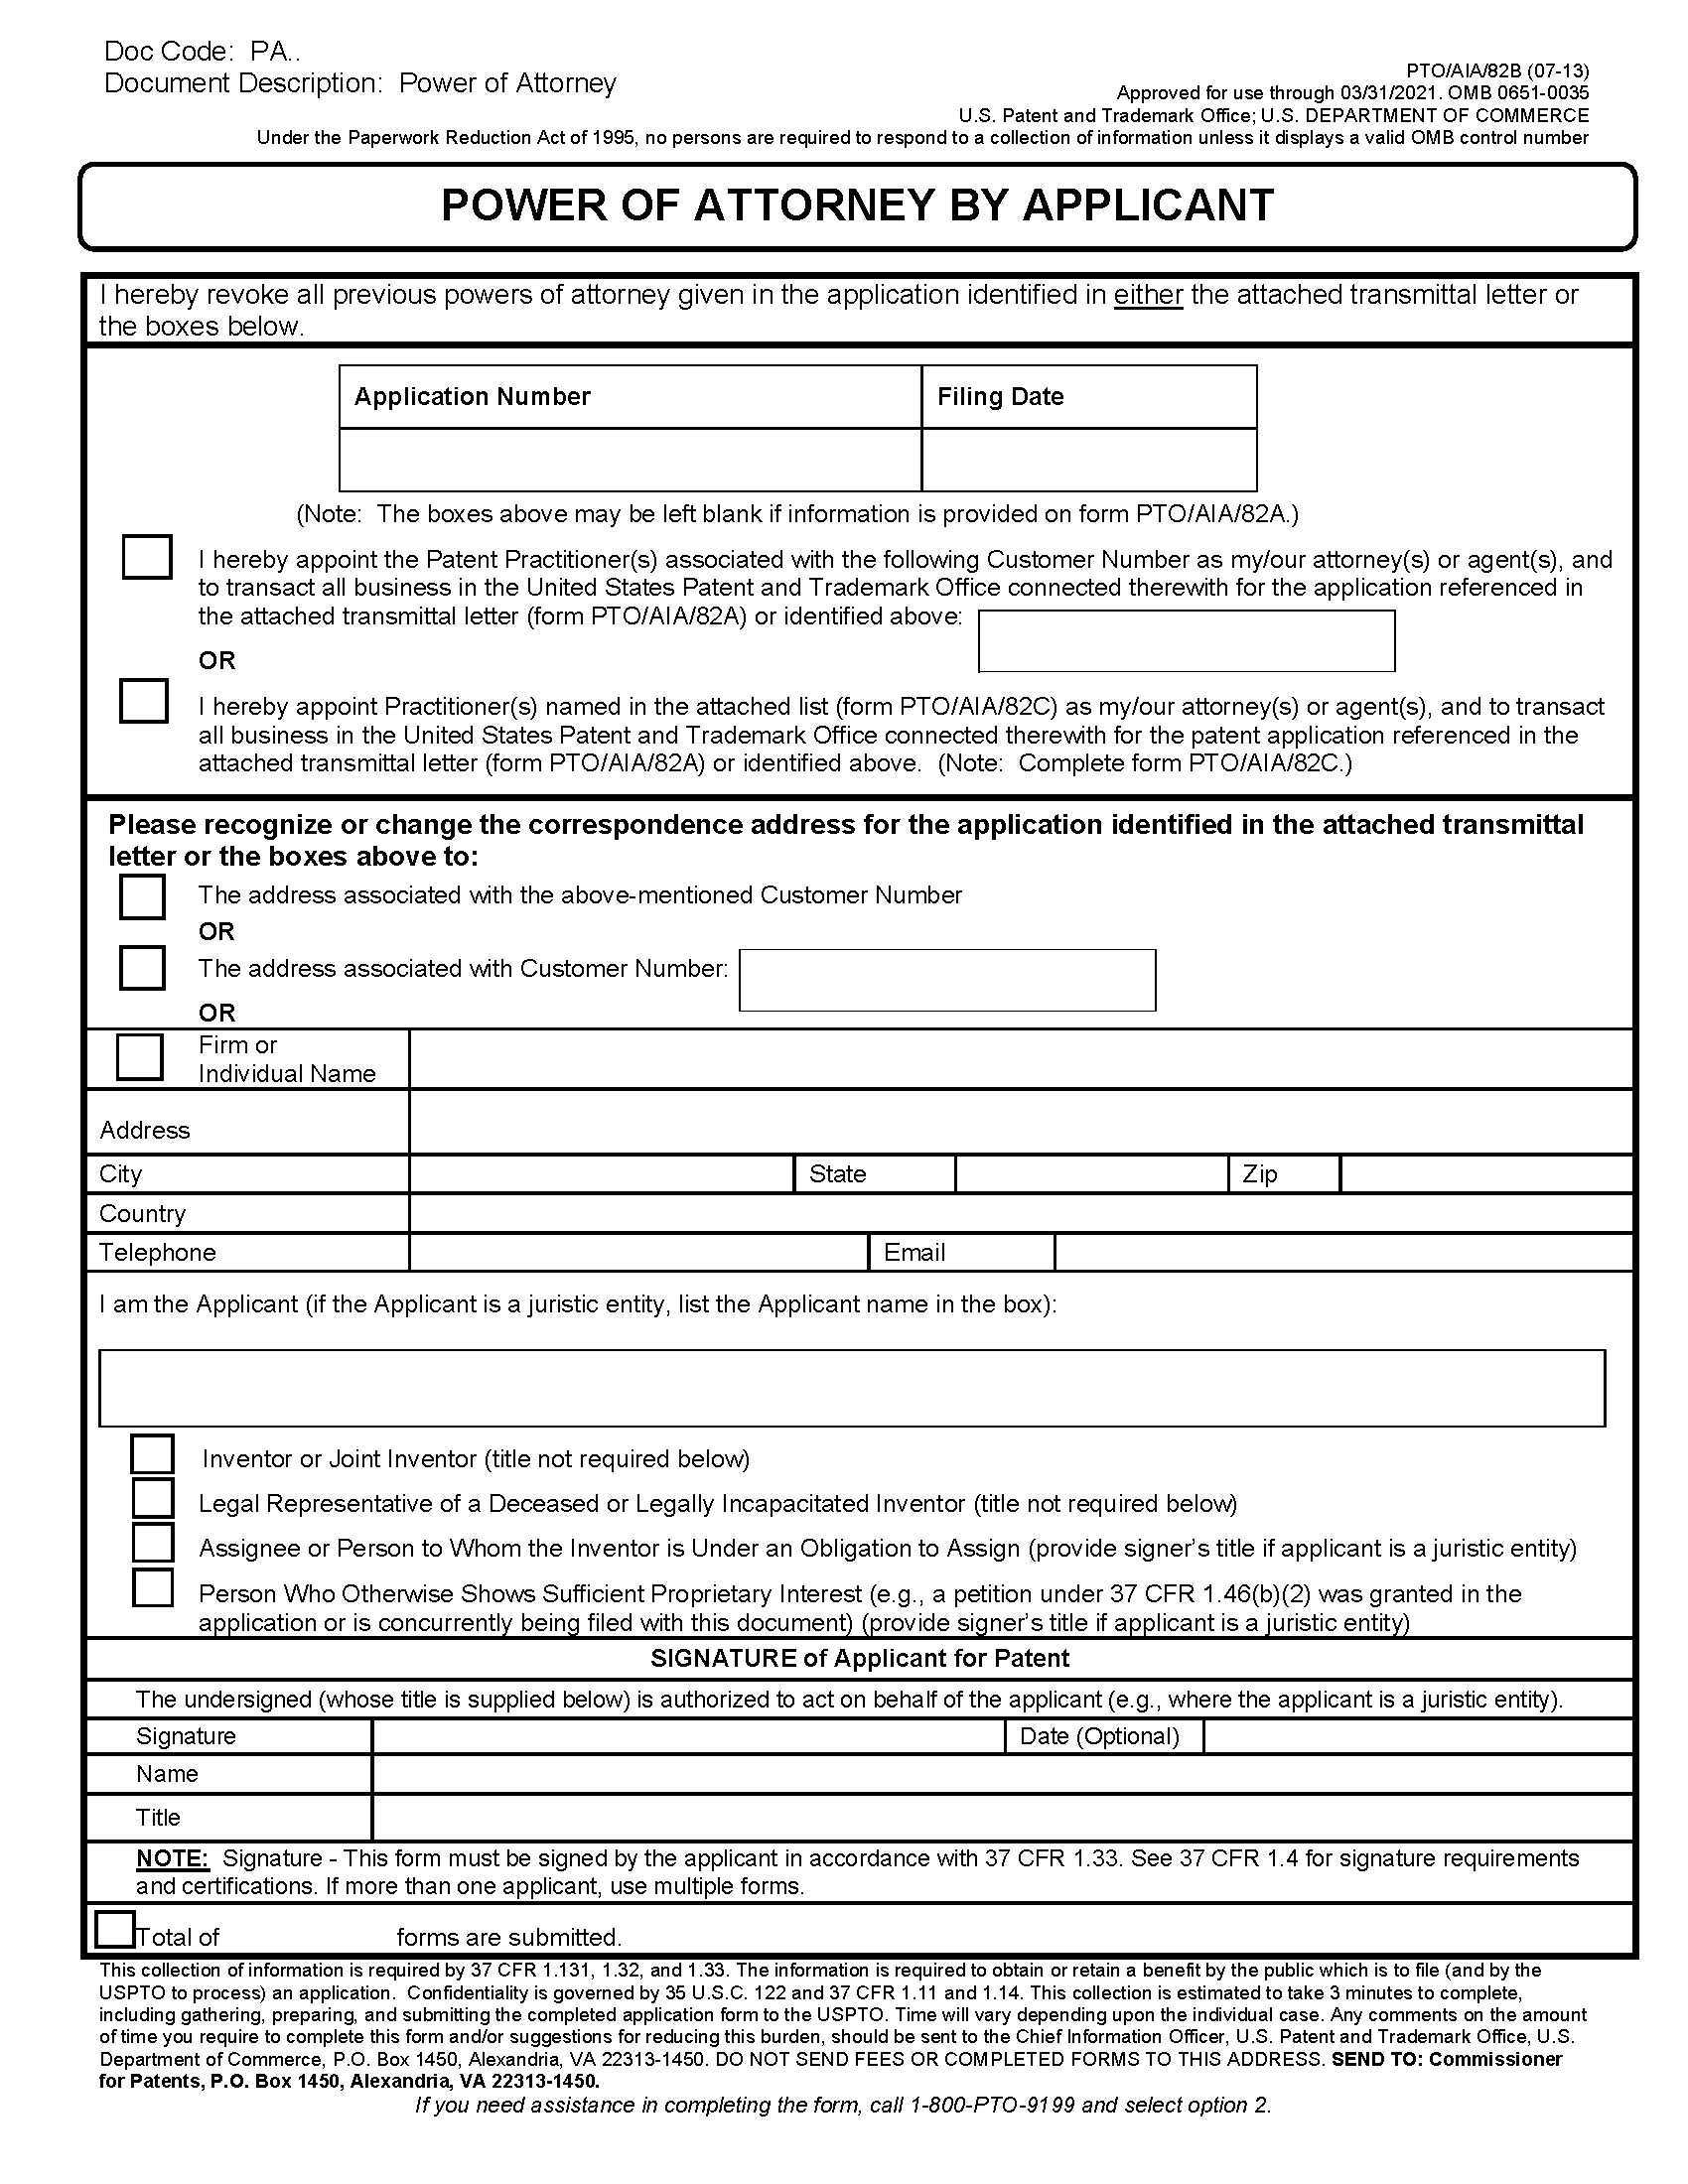 Power of Attorney form PTO/AIA/82B